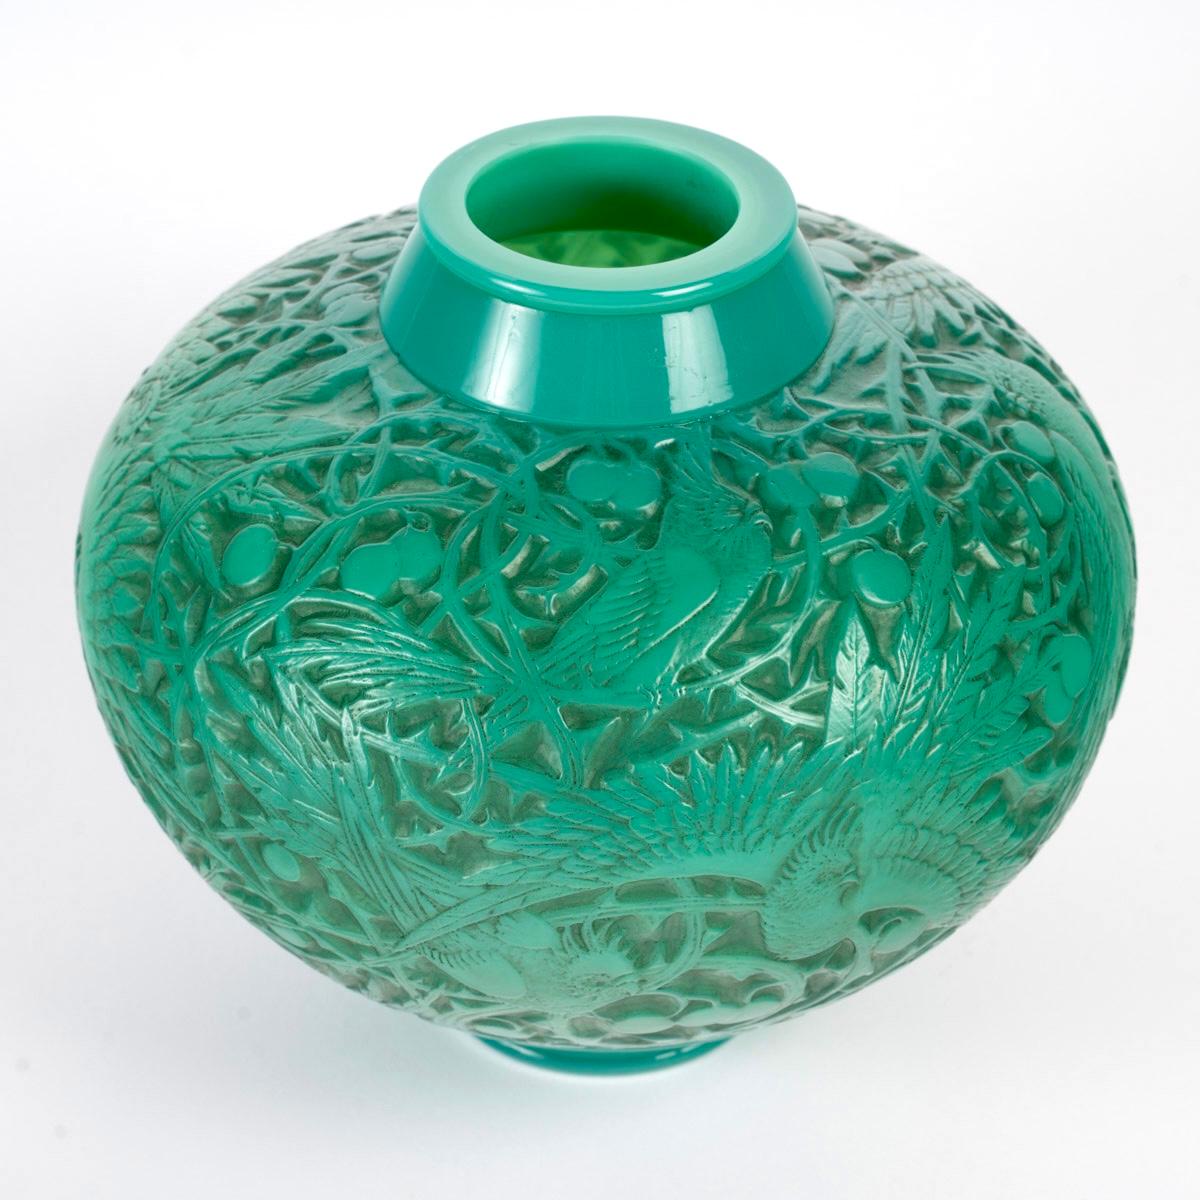 Molded 1924 René Lalique - Vase Aras Cased Jade Green Glass With Grey Patina Parrots For Sale